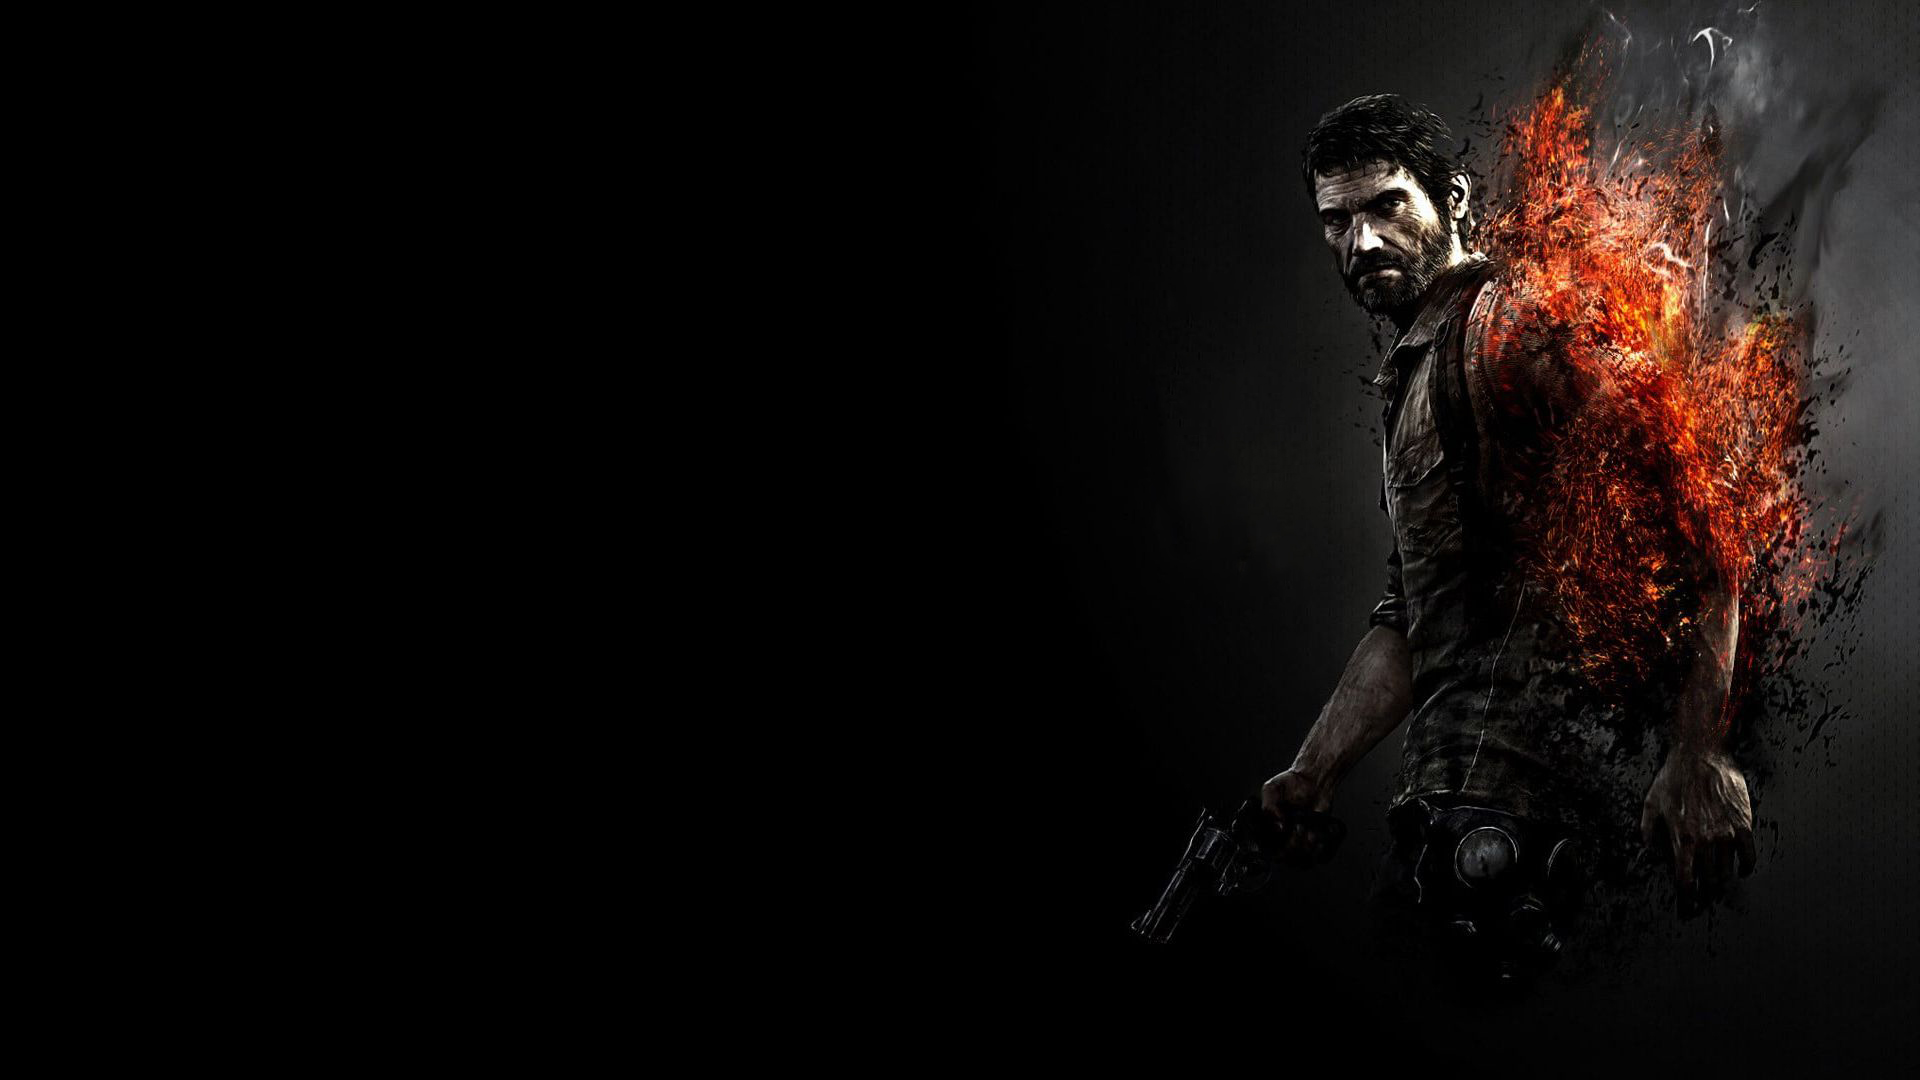 General 1920x1080 The Last of Us Joel Miller black background video games PlayStation 3 video game art revolver monochrome video game characters simple background